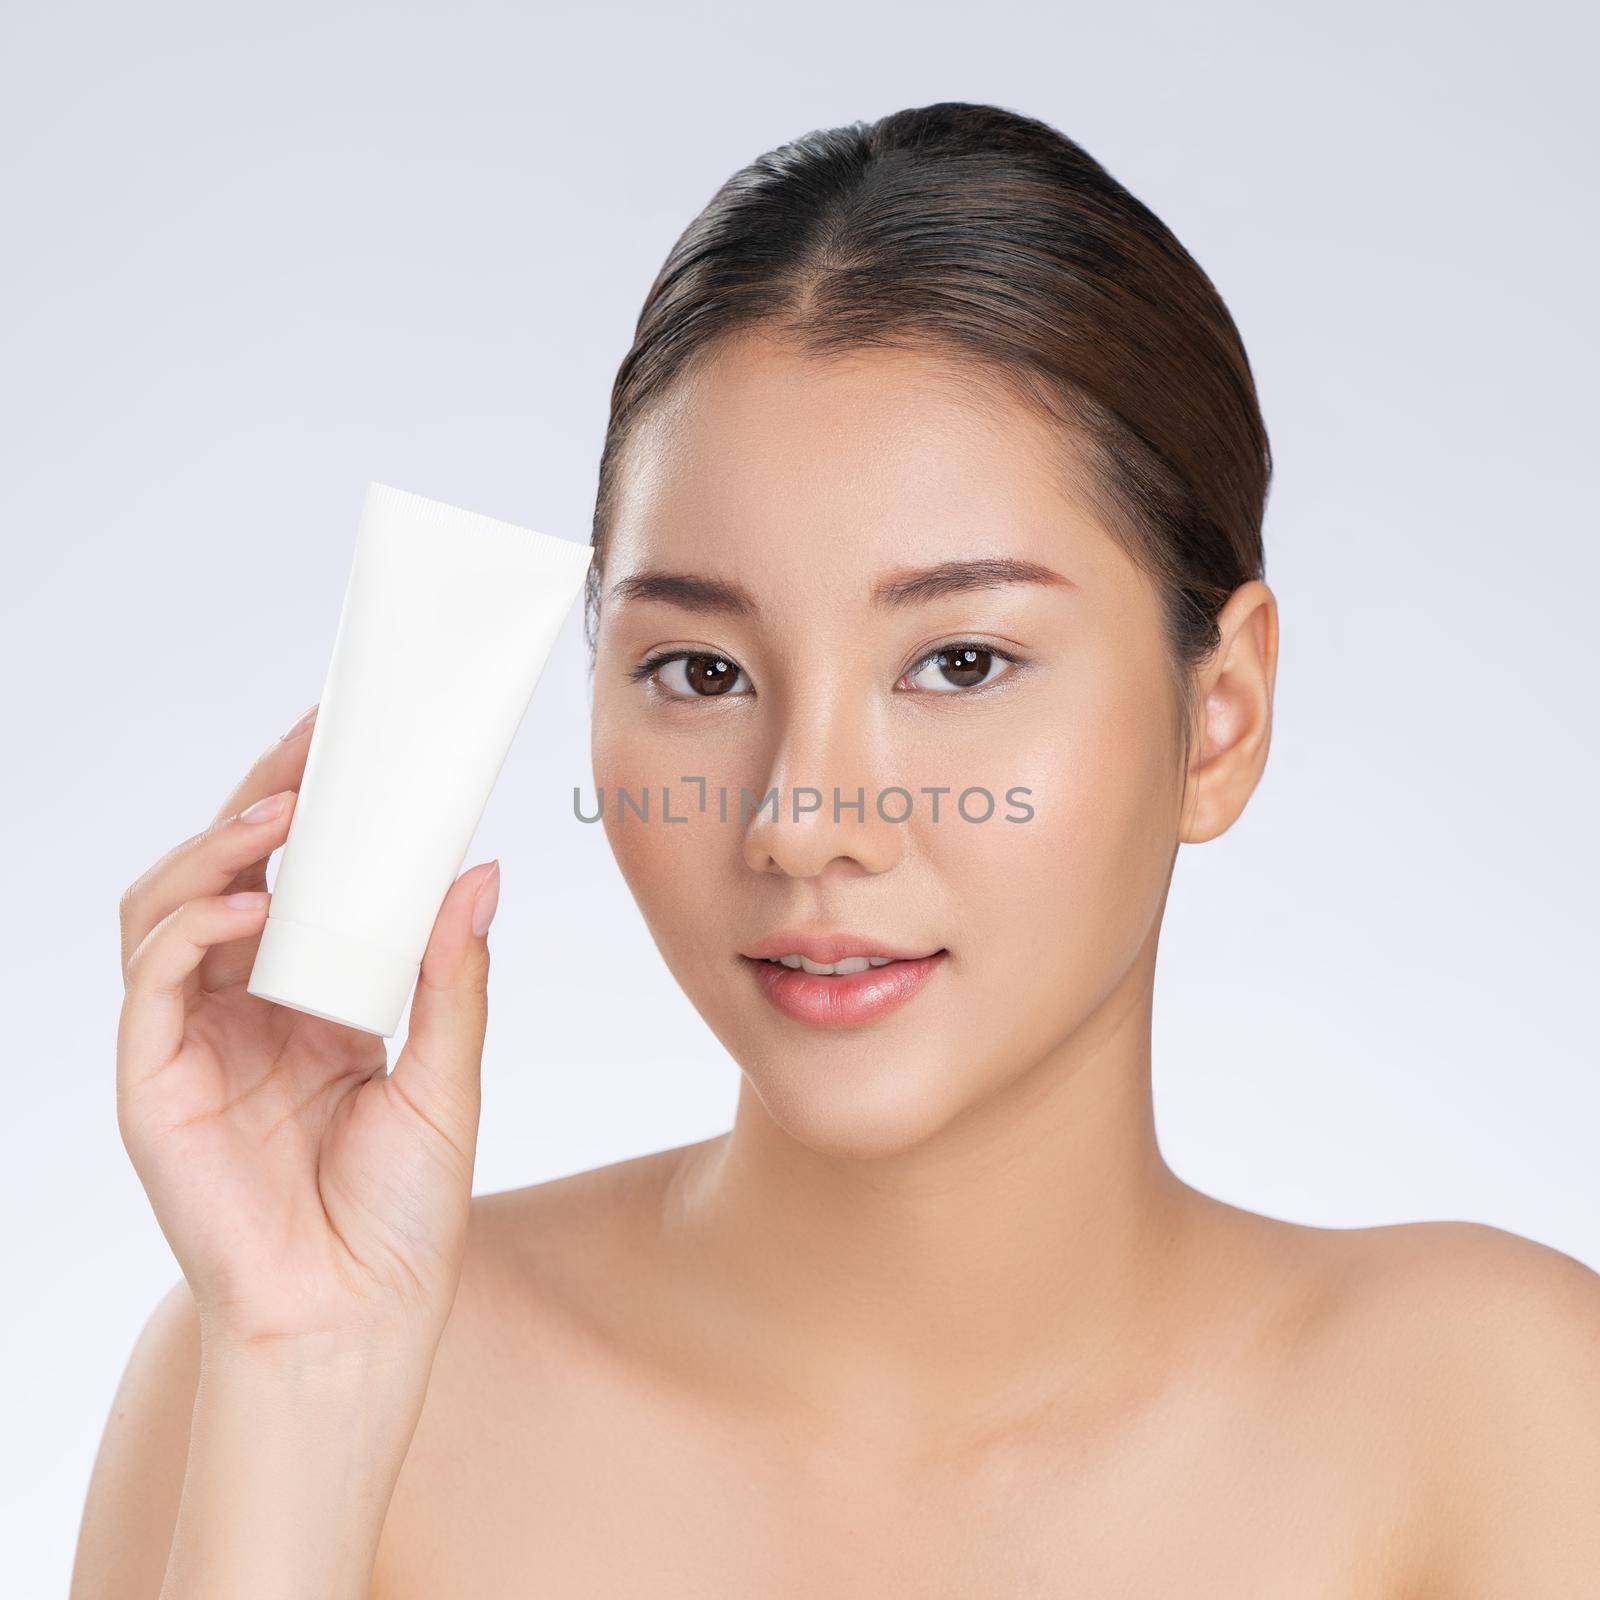 Gorgeous woman smiling holding mockup product for advertising text place, light grey background. Concept of healthcare for skin, beauty care product for advertising.